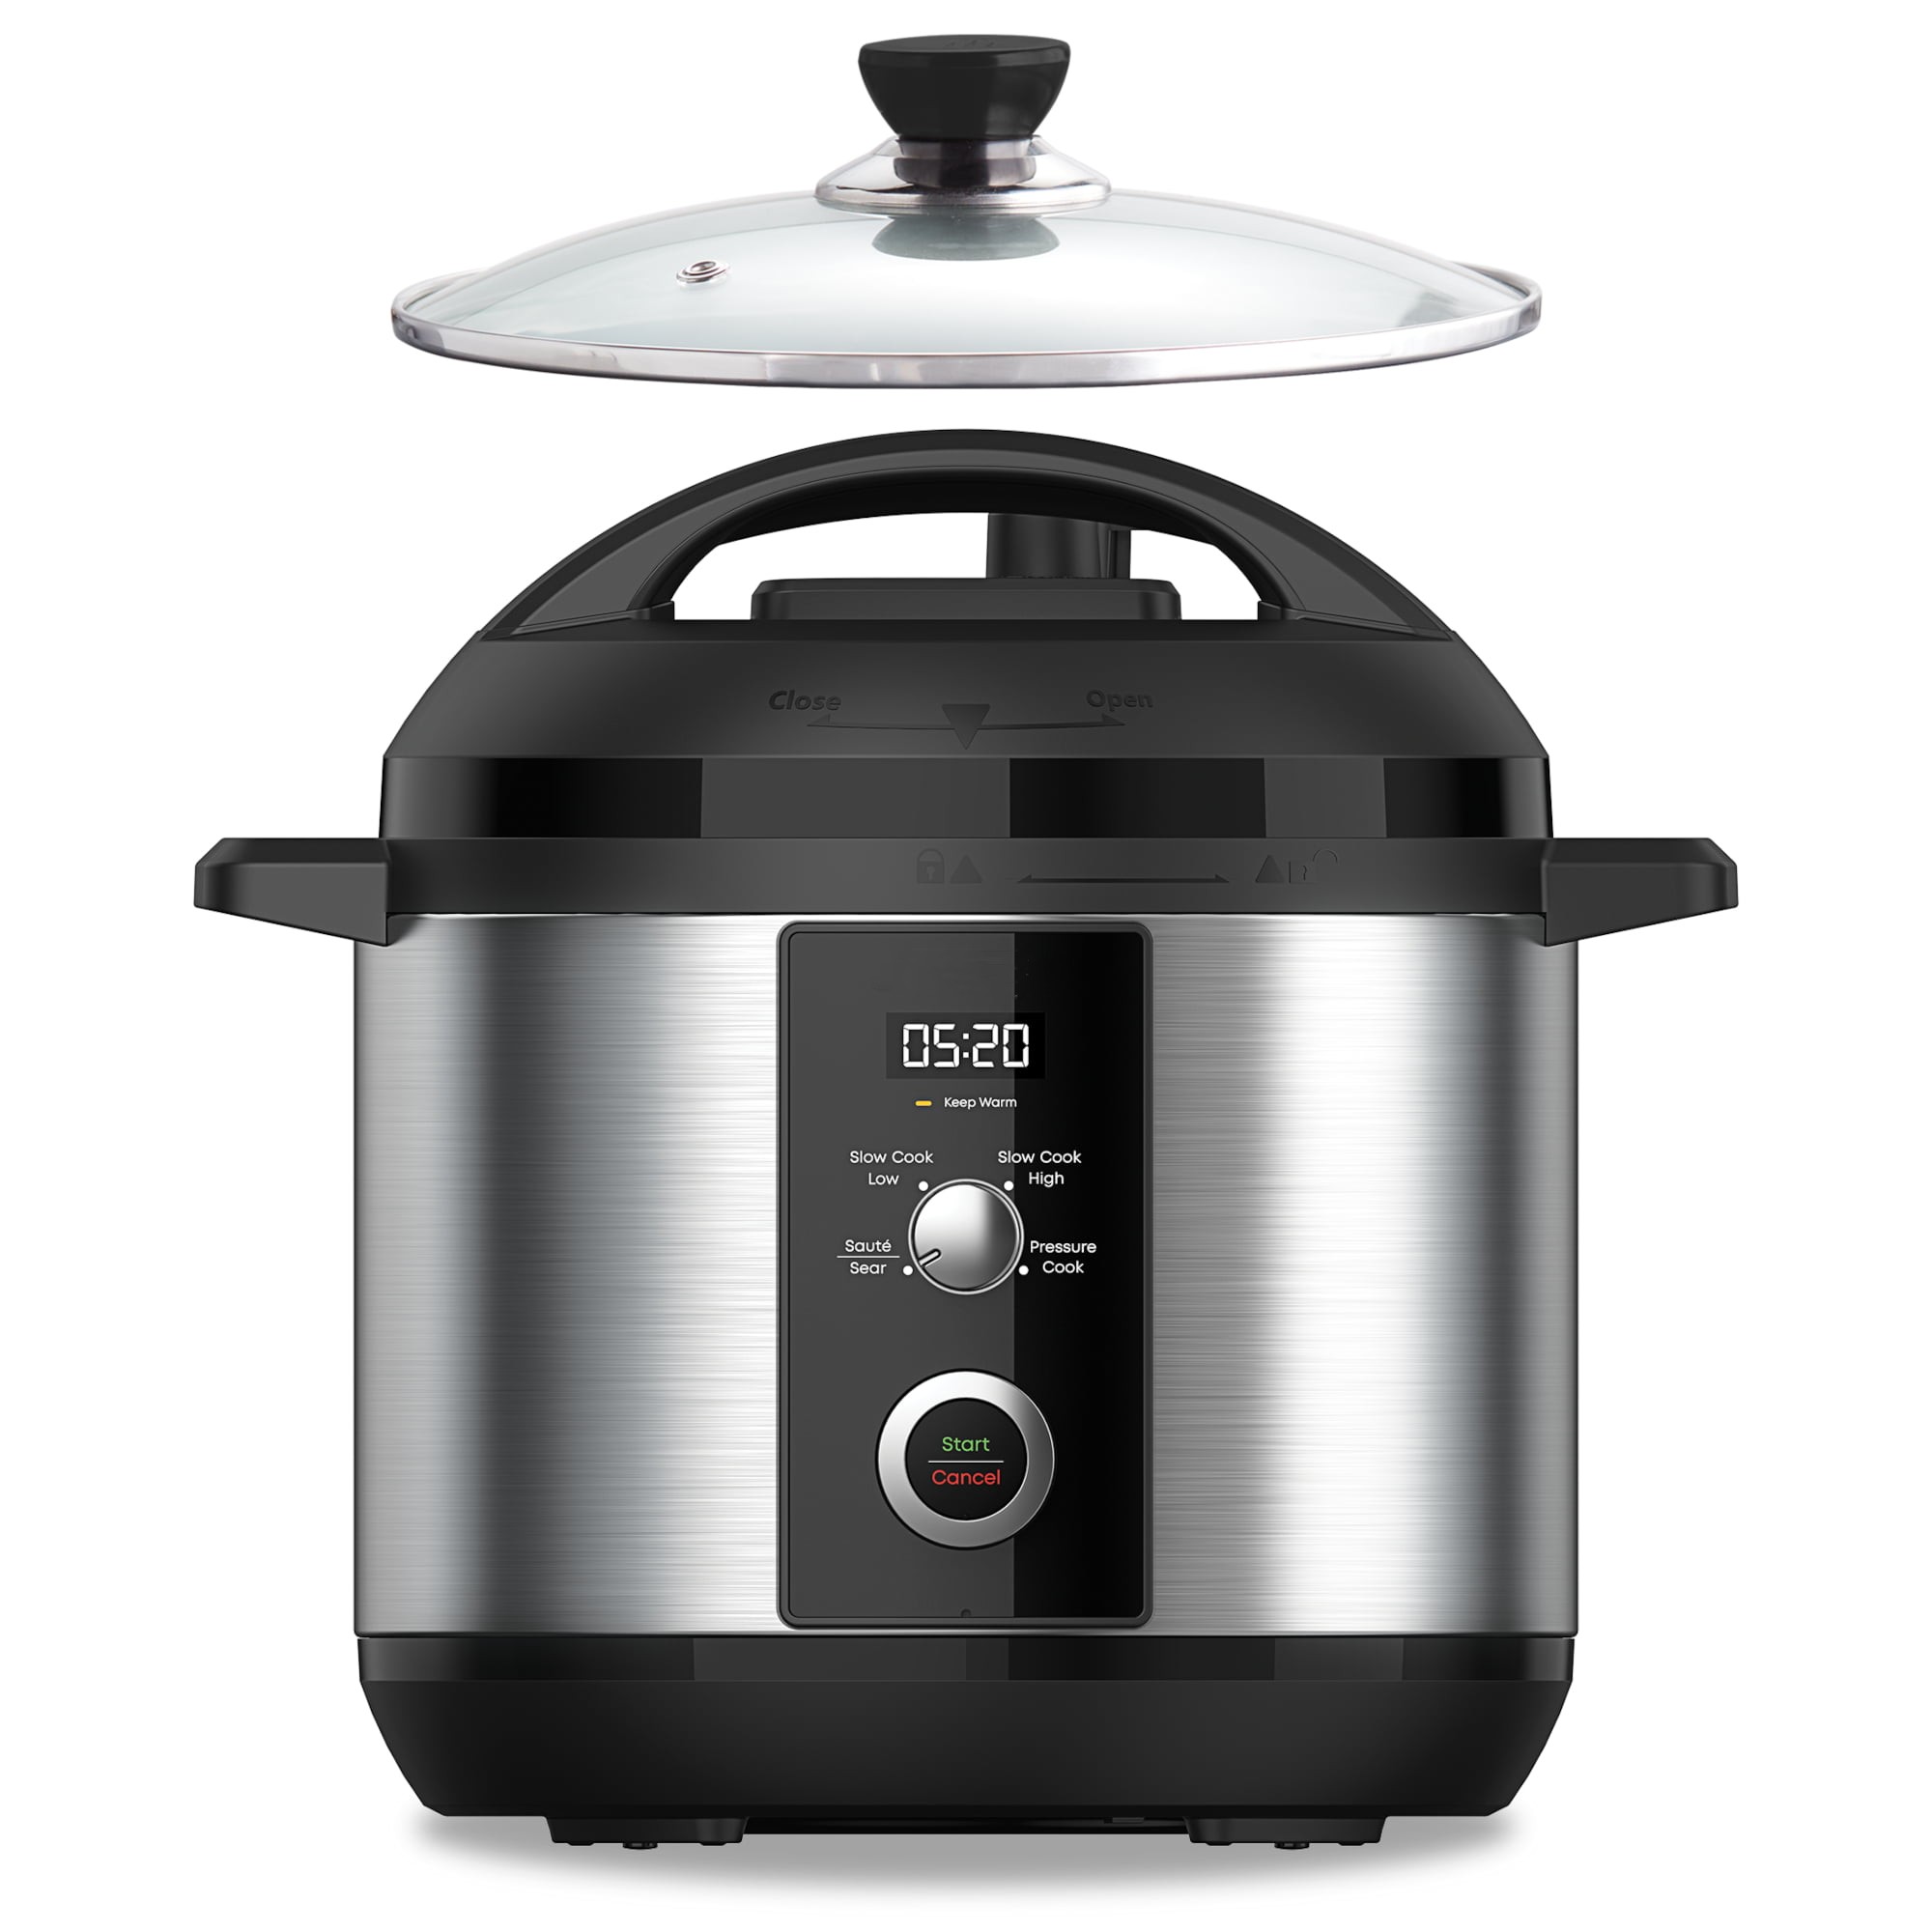 https://storables.com/wp-content/uploads/2023/08/14-incredible-3-in-1-slow-cooker-for-2023-1693370550.jpeg